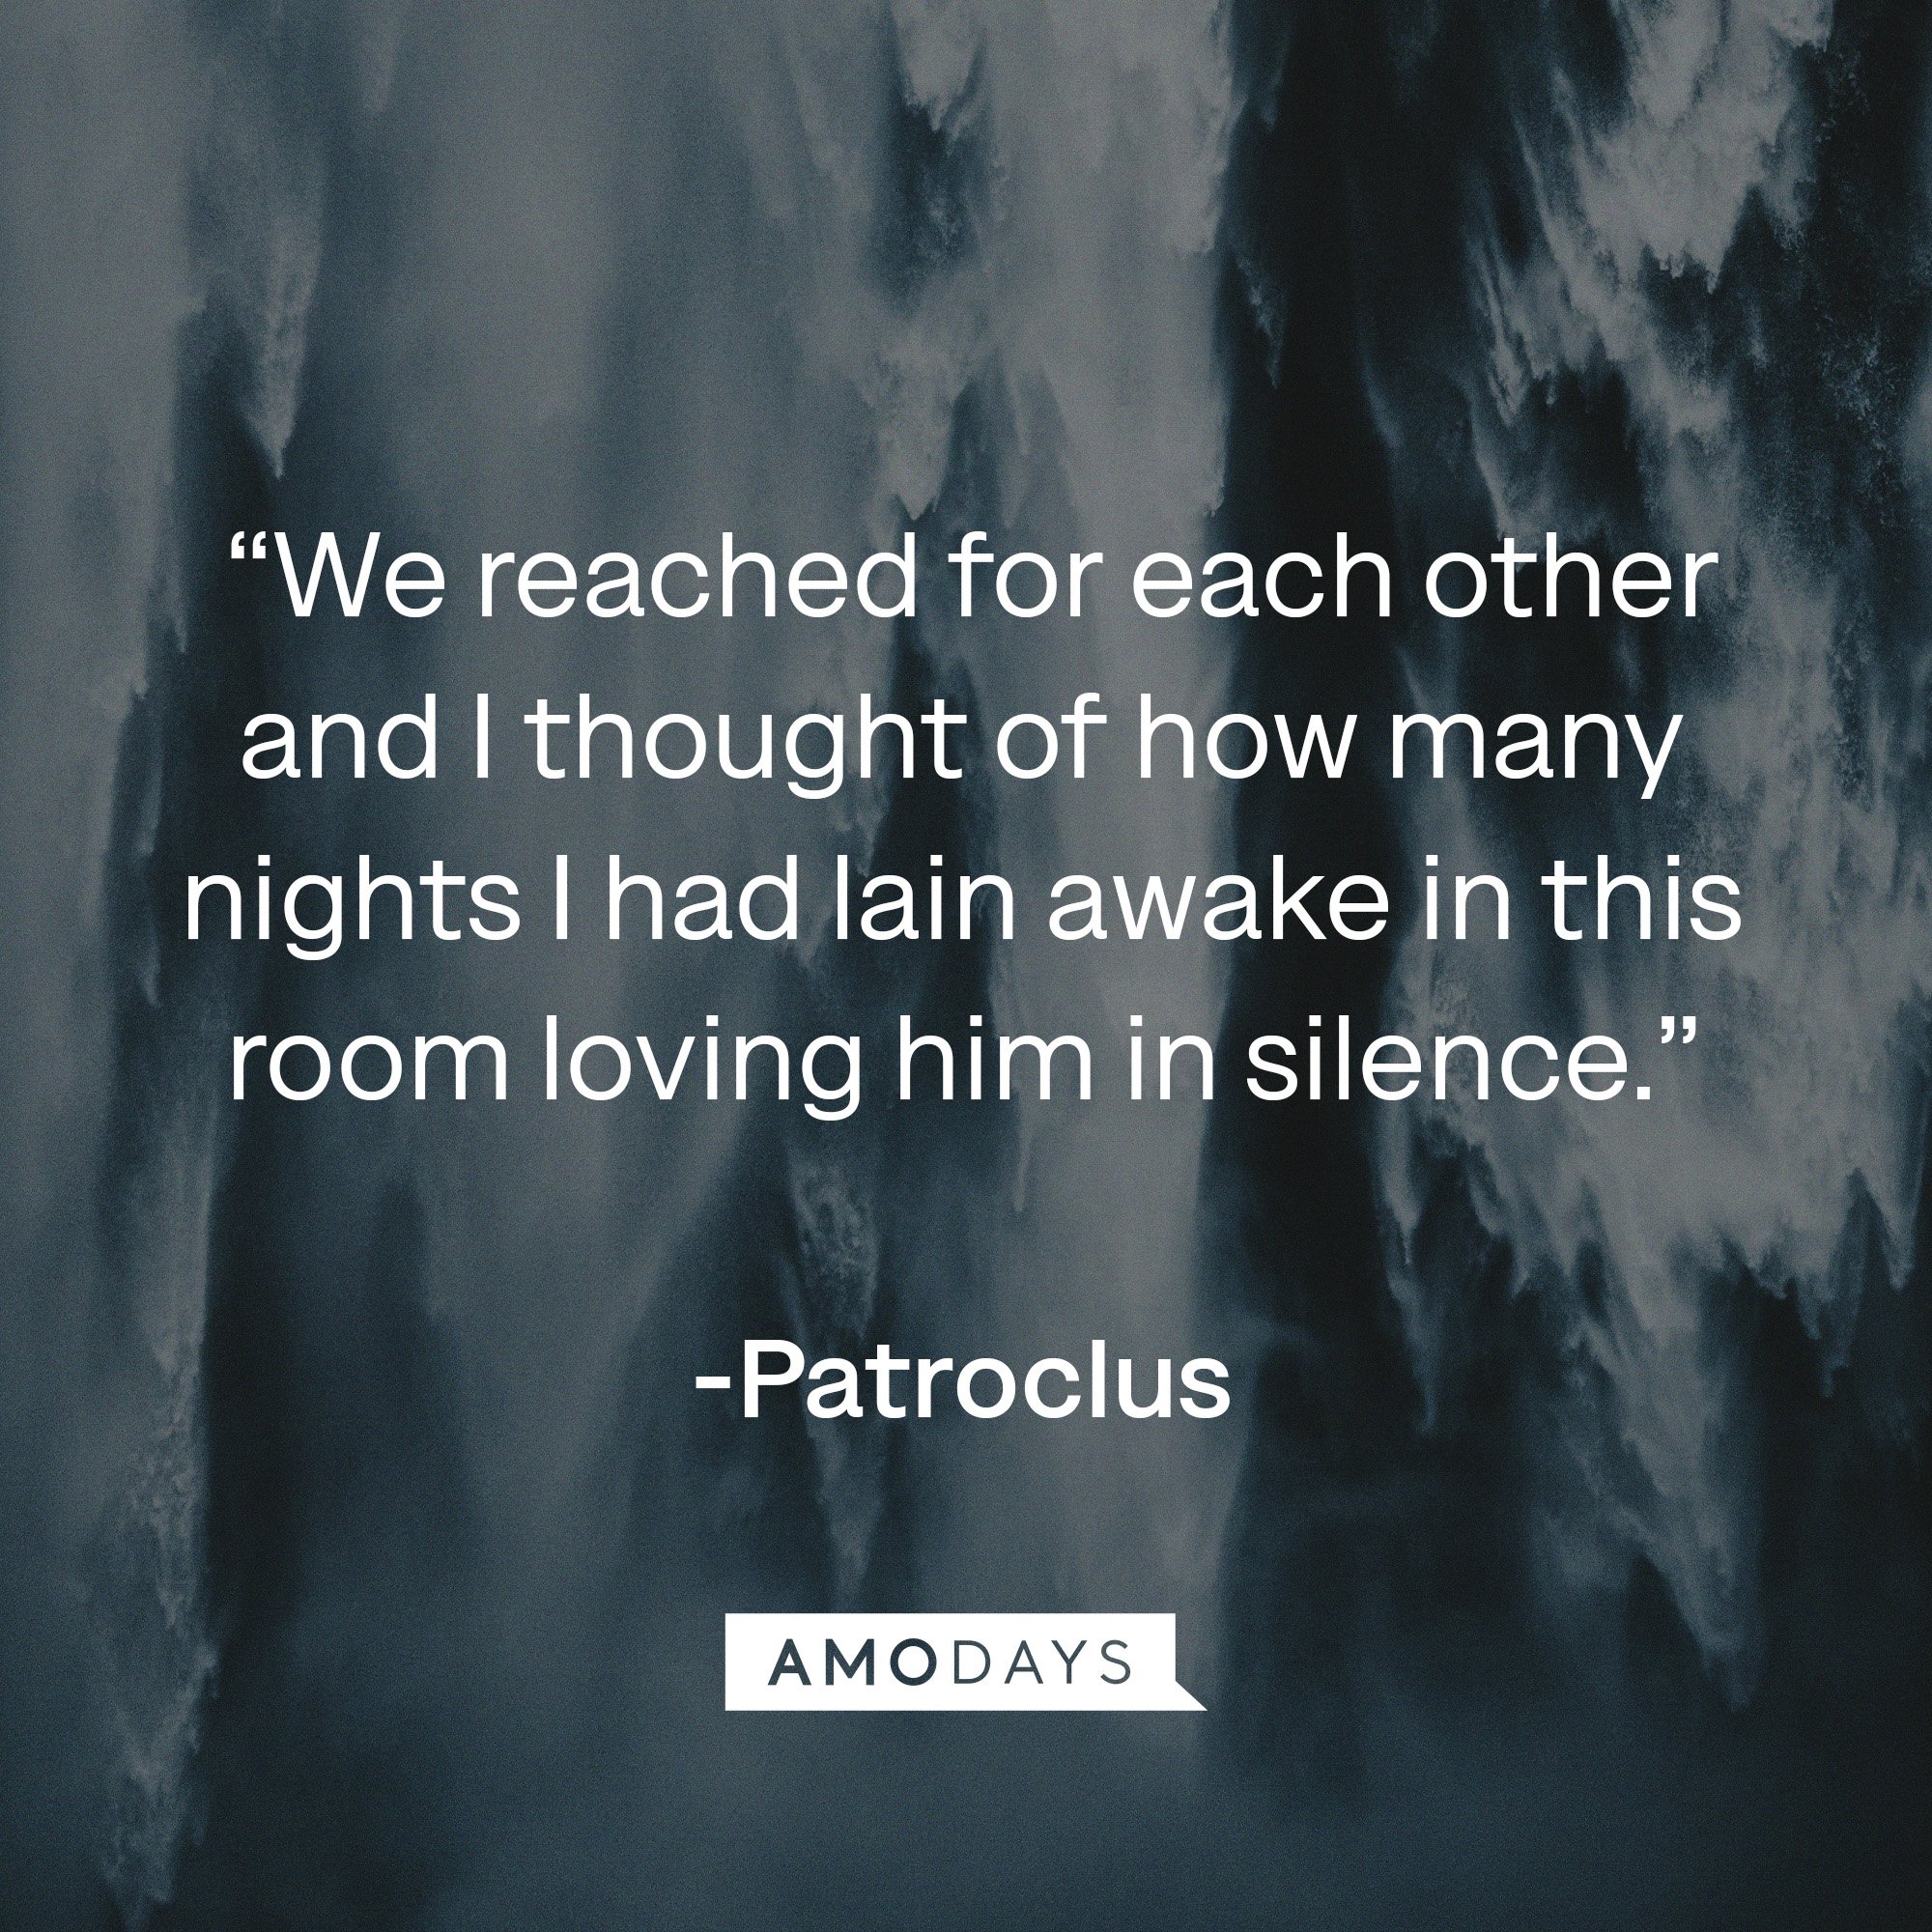  Patroclus's quote:  “We reached for each other and I thought of how many nights I had lain awake in this room loving him in silence.” | Image: AmoDays